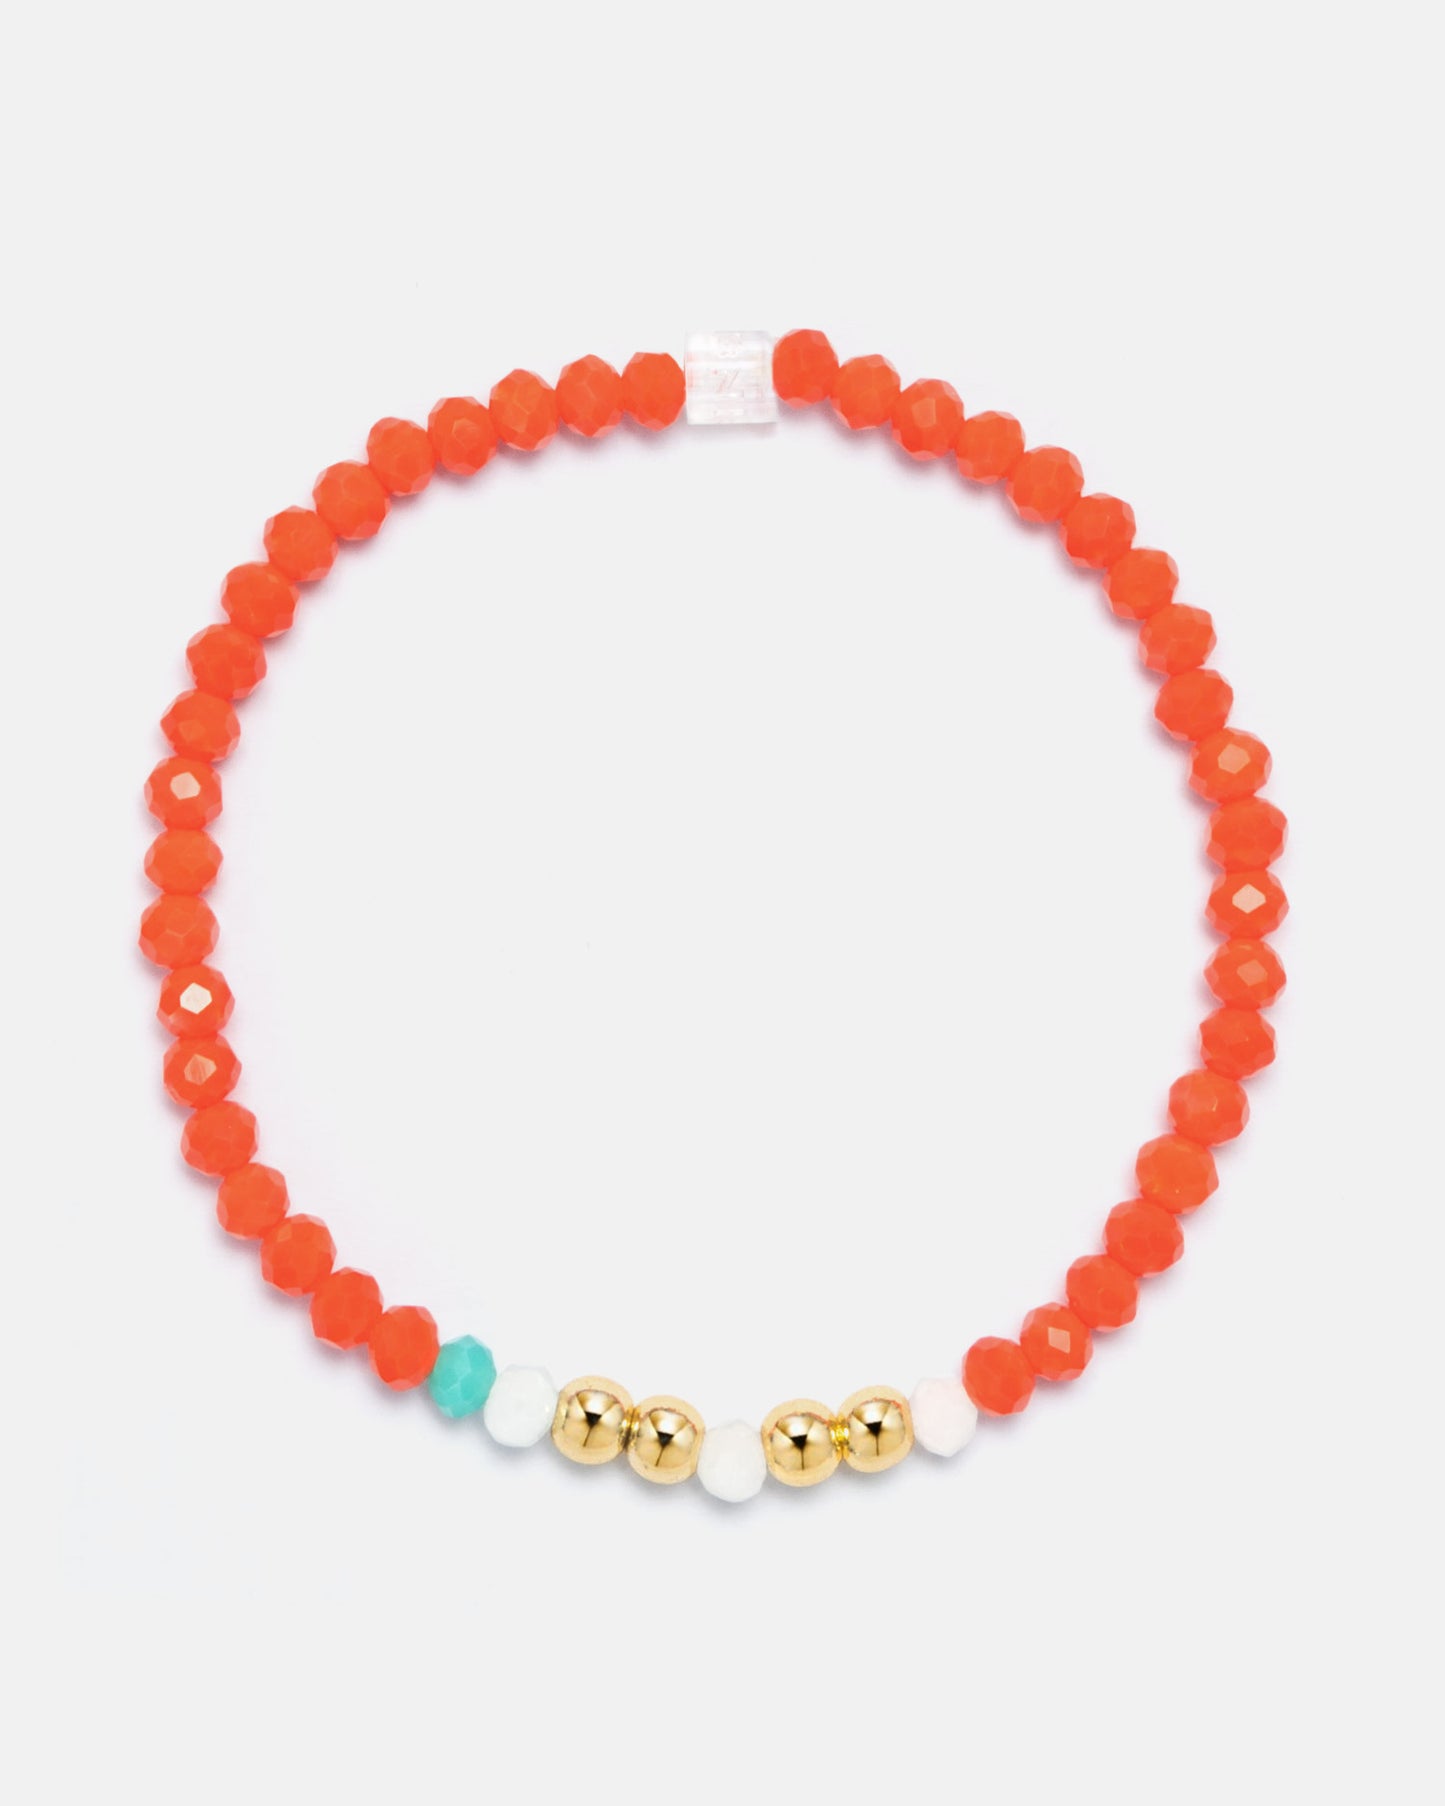 Beaded Bracelet with Coral, Turquoise, White Seed Beads and 18kt Gold Beads